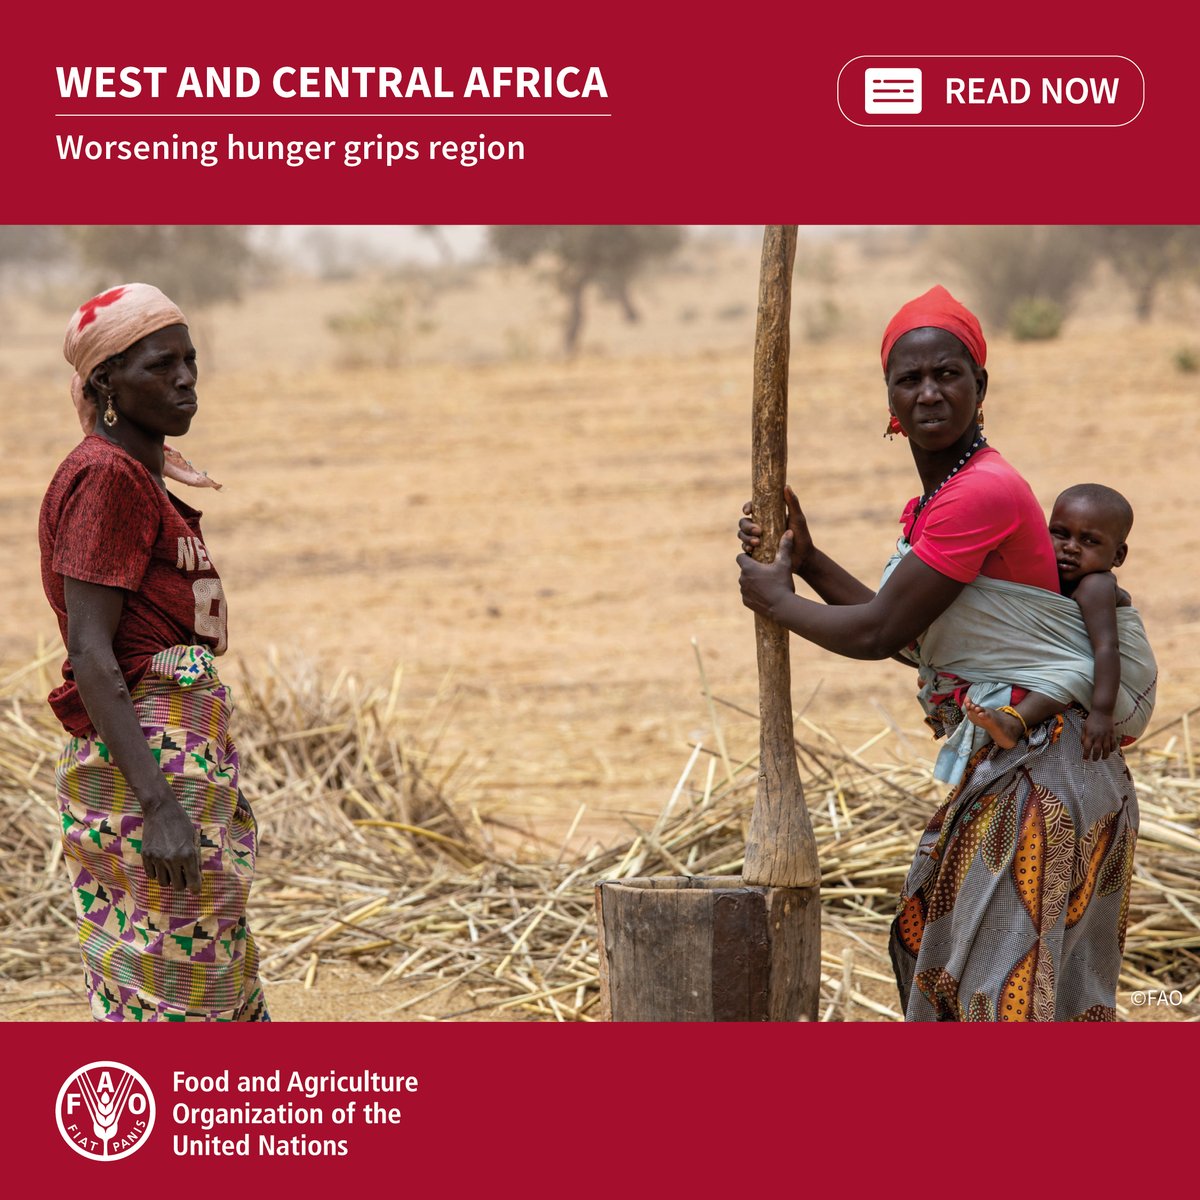 .@FAO-@UNICEF-@WFP sound the alarm as worsening hunger grips West and Central Africa amid conflict and economic turmoil. Nearly 55 million people will struggle to feed themselves in the upcoming lean season. Urgent long lasting actions are required. bit.ly/3W06x1h